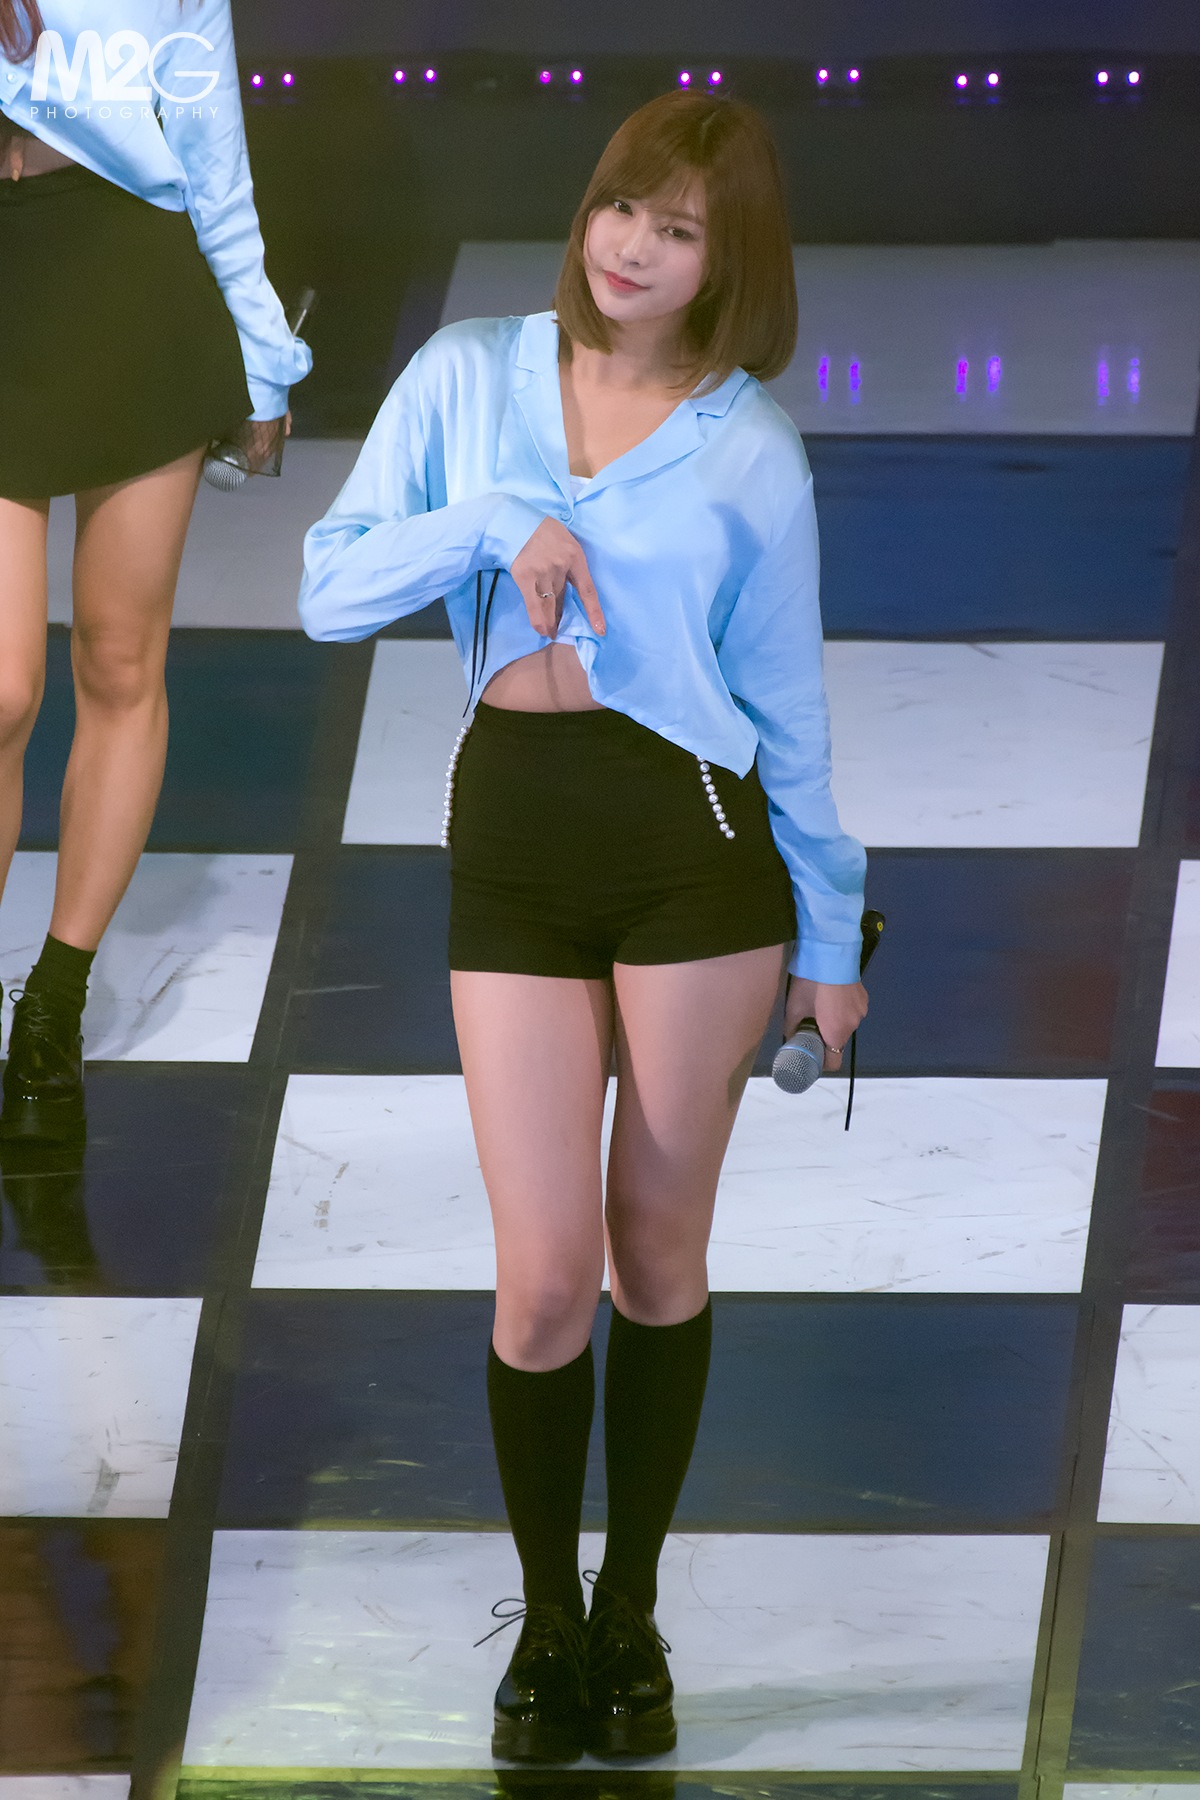 TOP 10 Sexiest Outfits of Apink Hayoung - Koreaboo